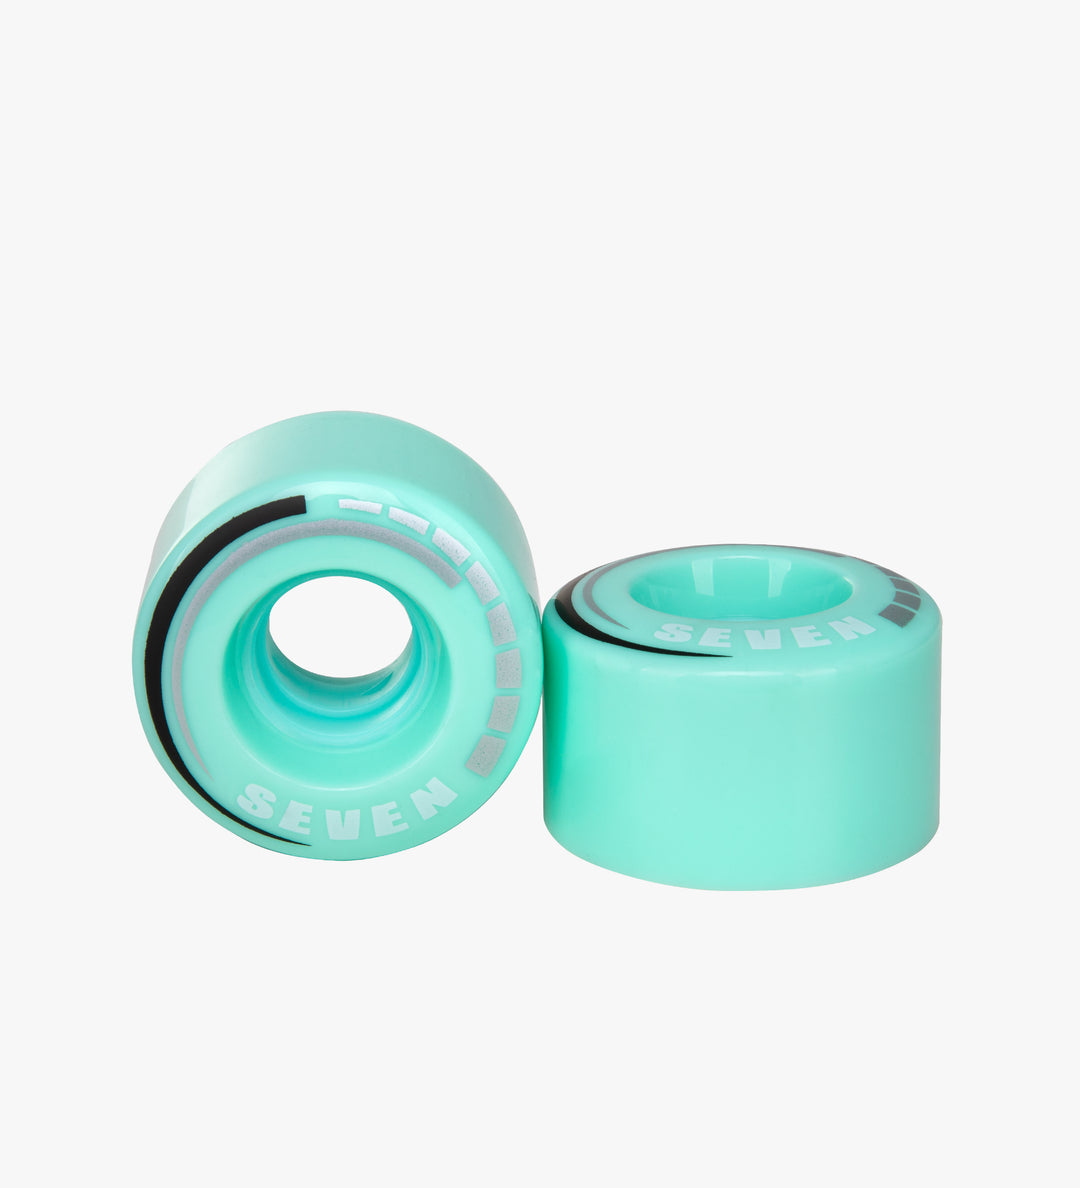 Mint C7 roller skate wheels made from durable 82A polyurethane with a 58 mm diameter and 32 mm width